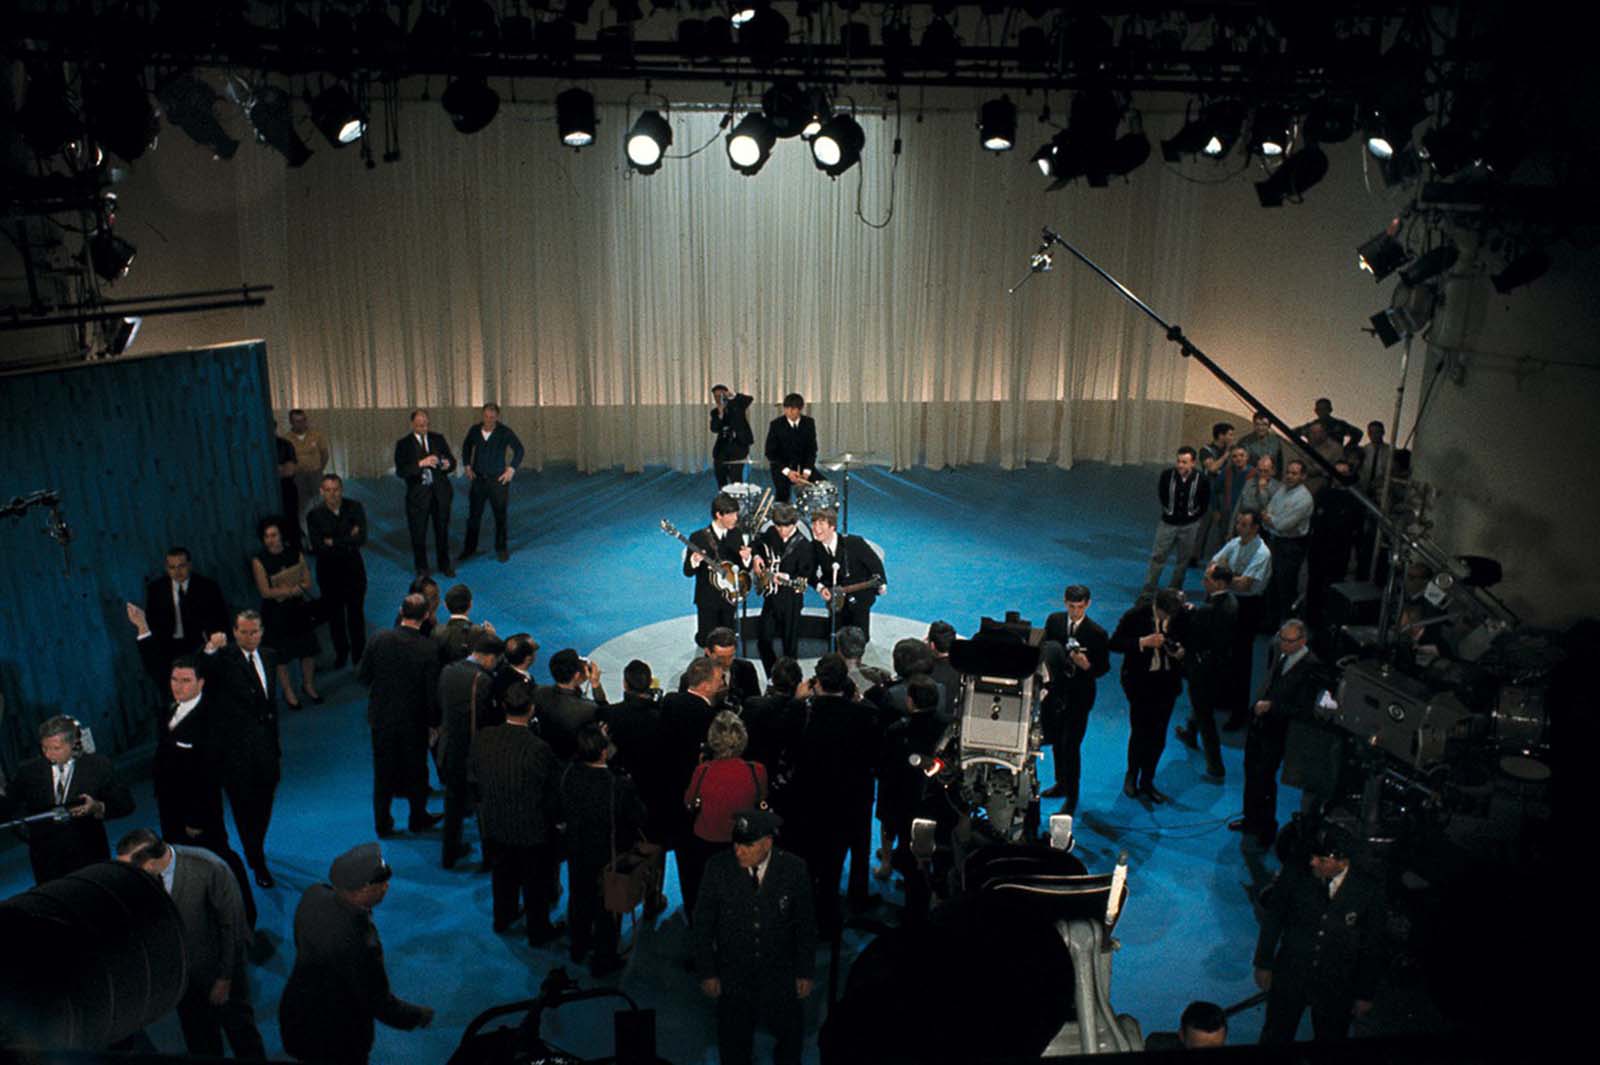 The British rock and roll group the Beatles are surrounded by photographers on stage at CBS' Studio 50 before their live television appearance on The Ed Sullivan Show in New York City on February 9, 1964.